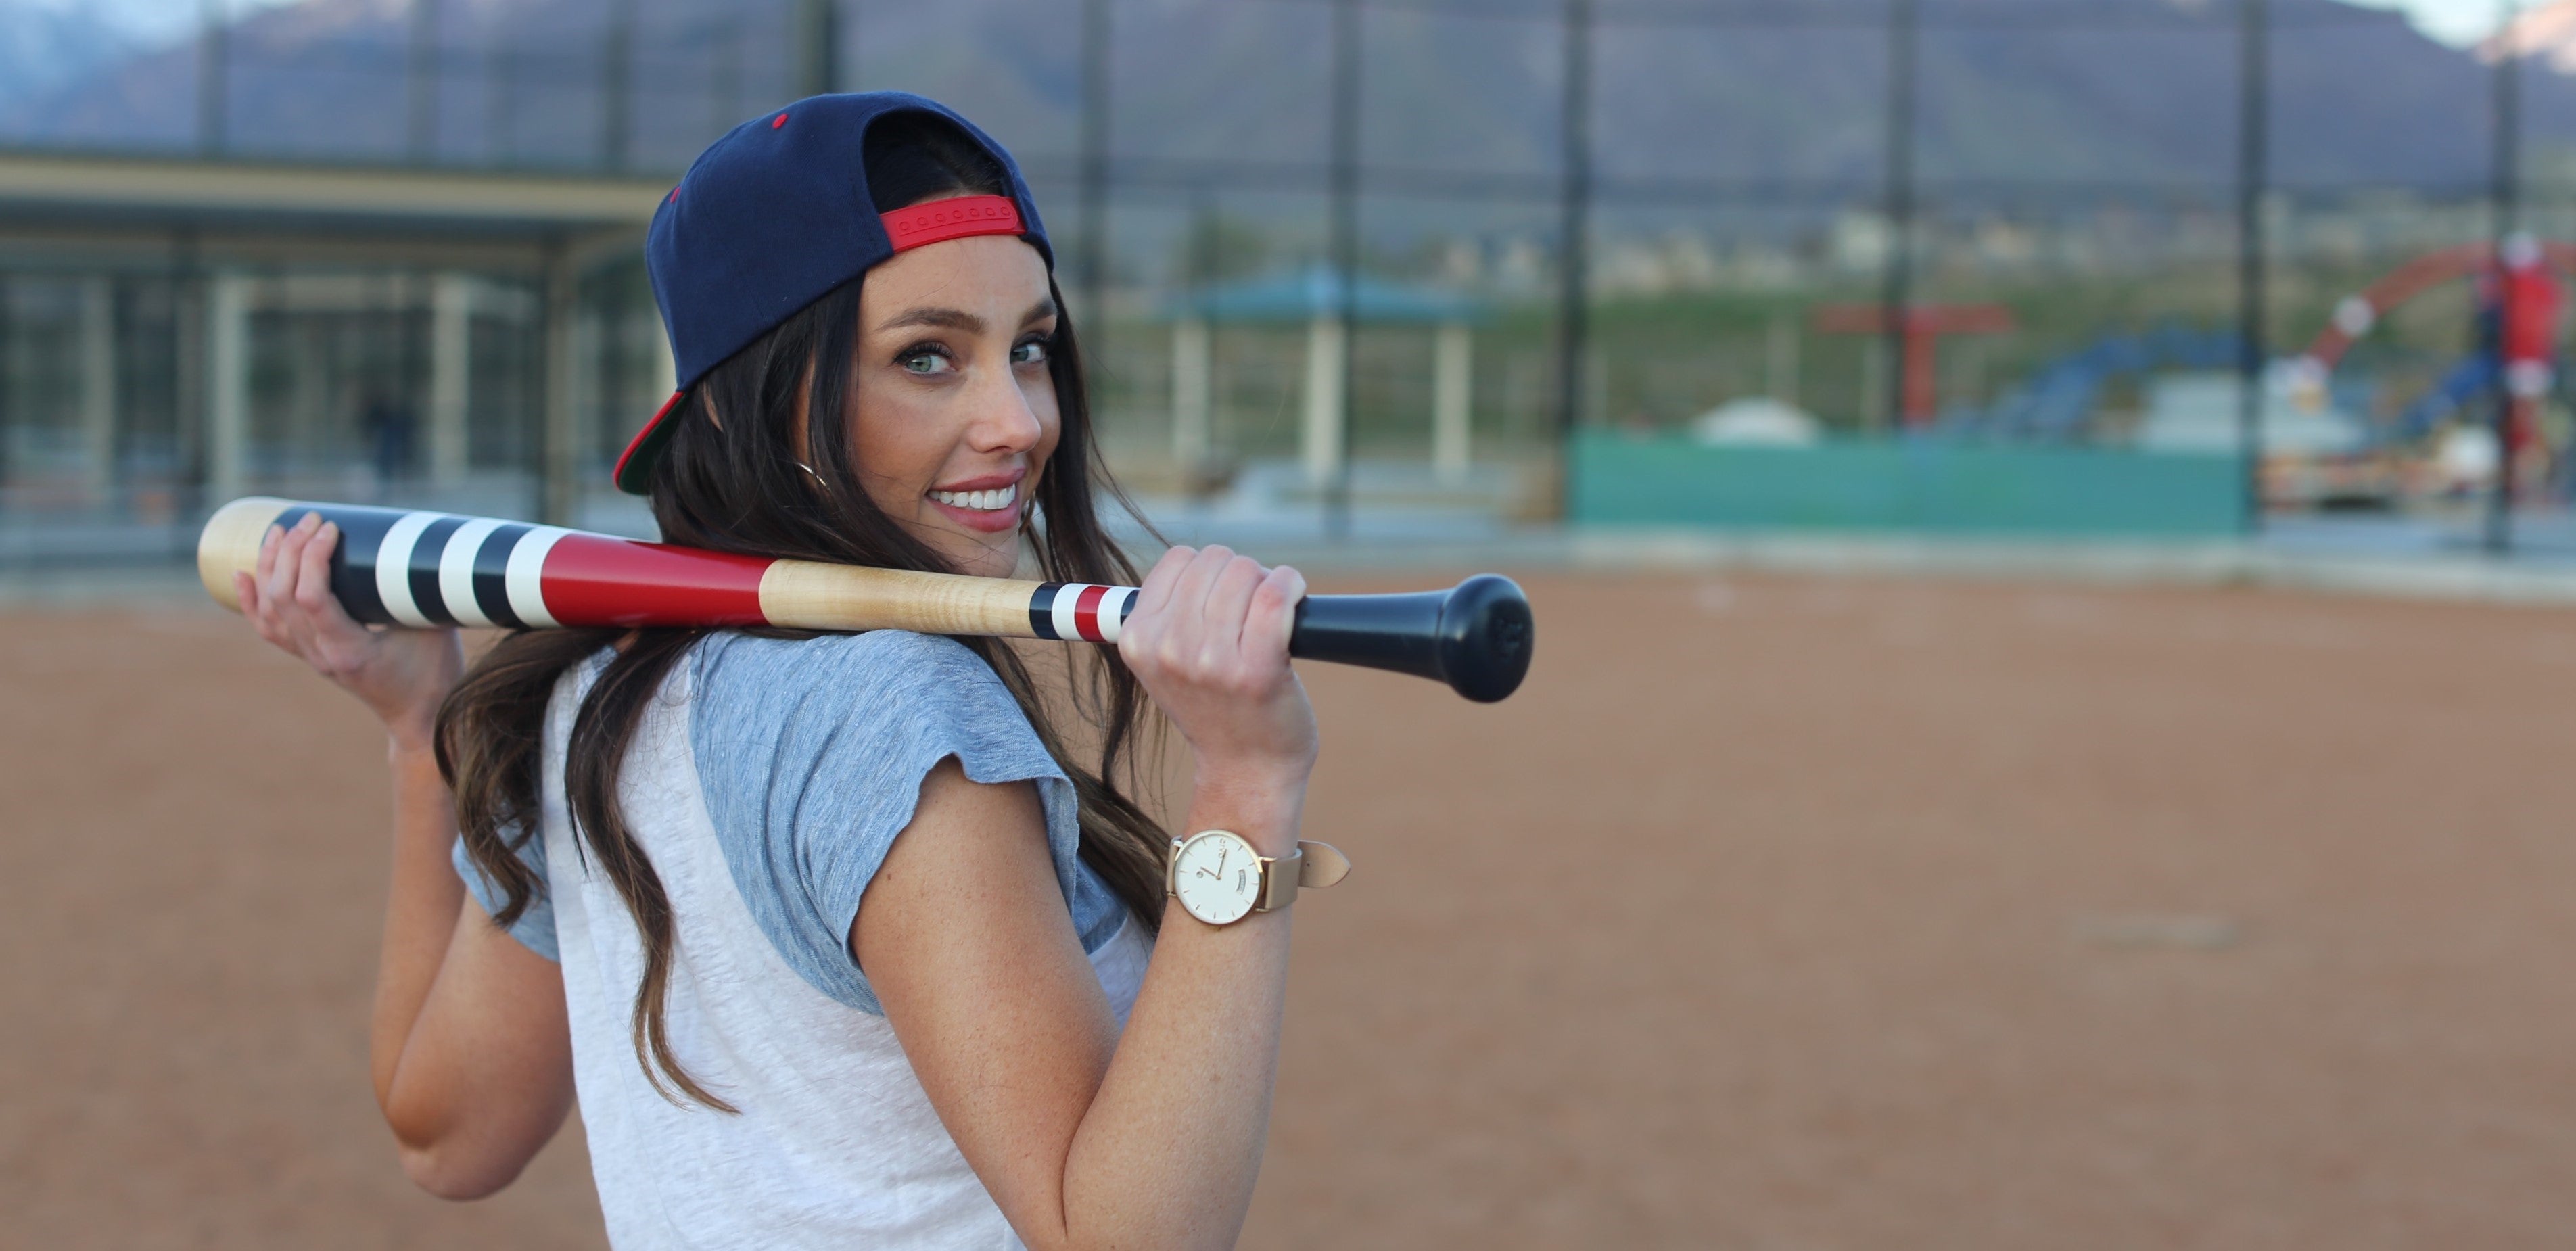 Young woman holding a bat on a softball field. She is wearing an Arvo Awristacrat Watch, Gold with a Nude color watch band.